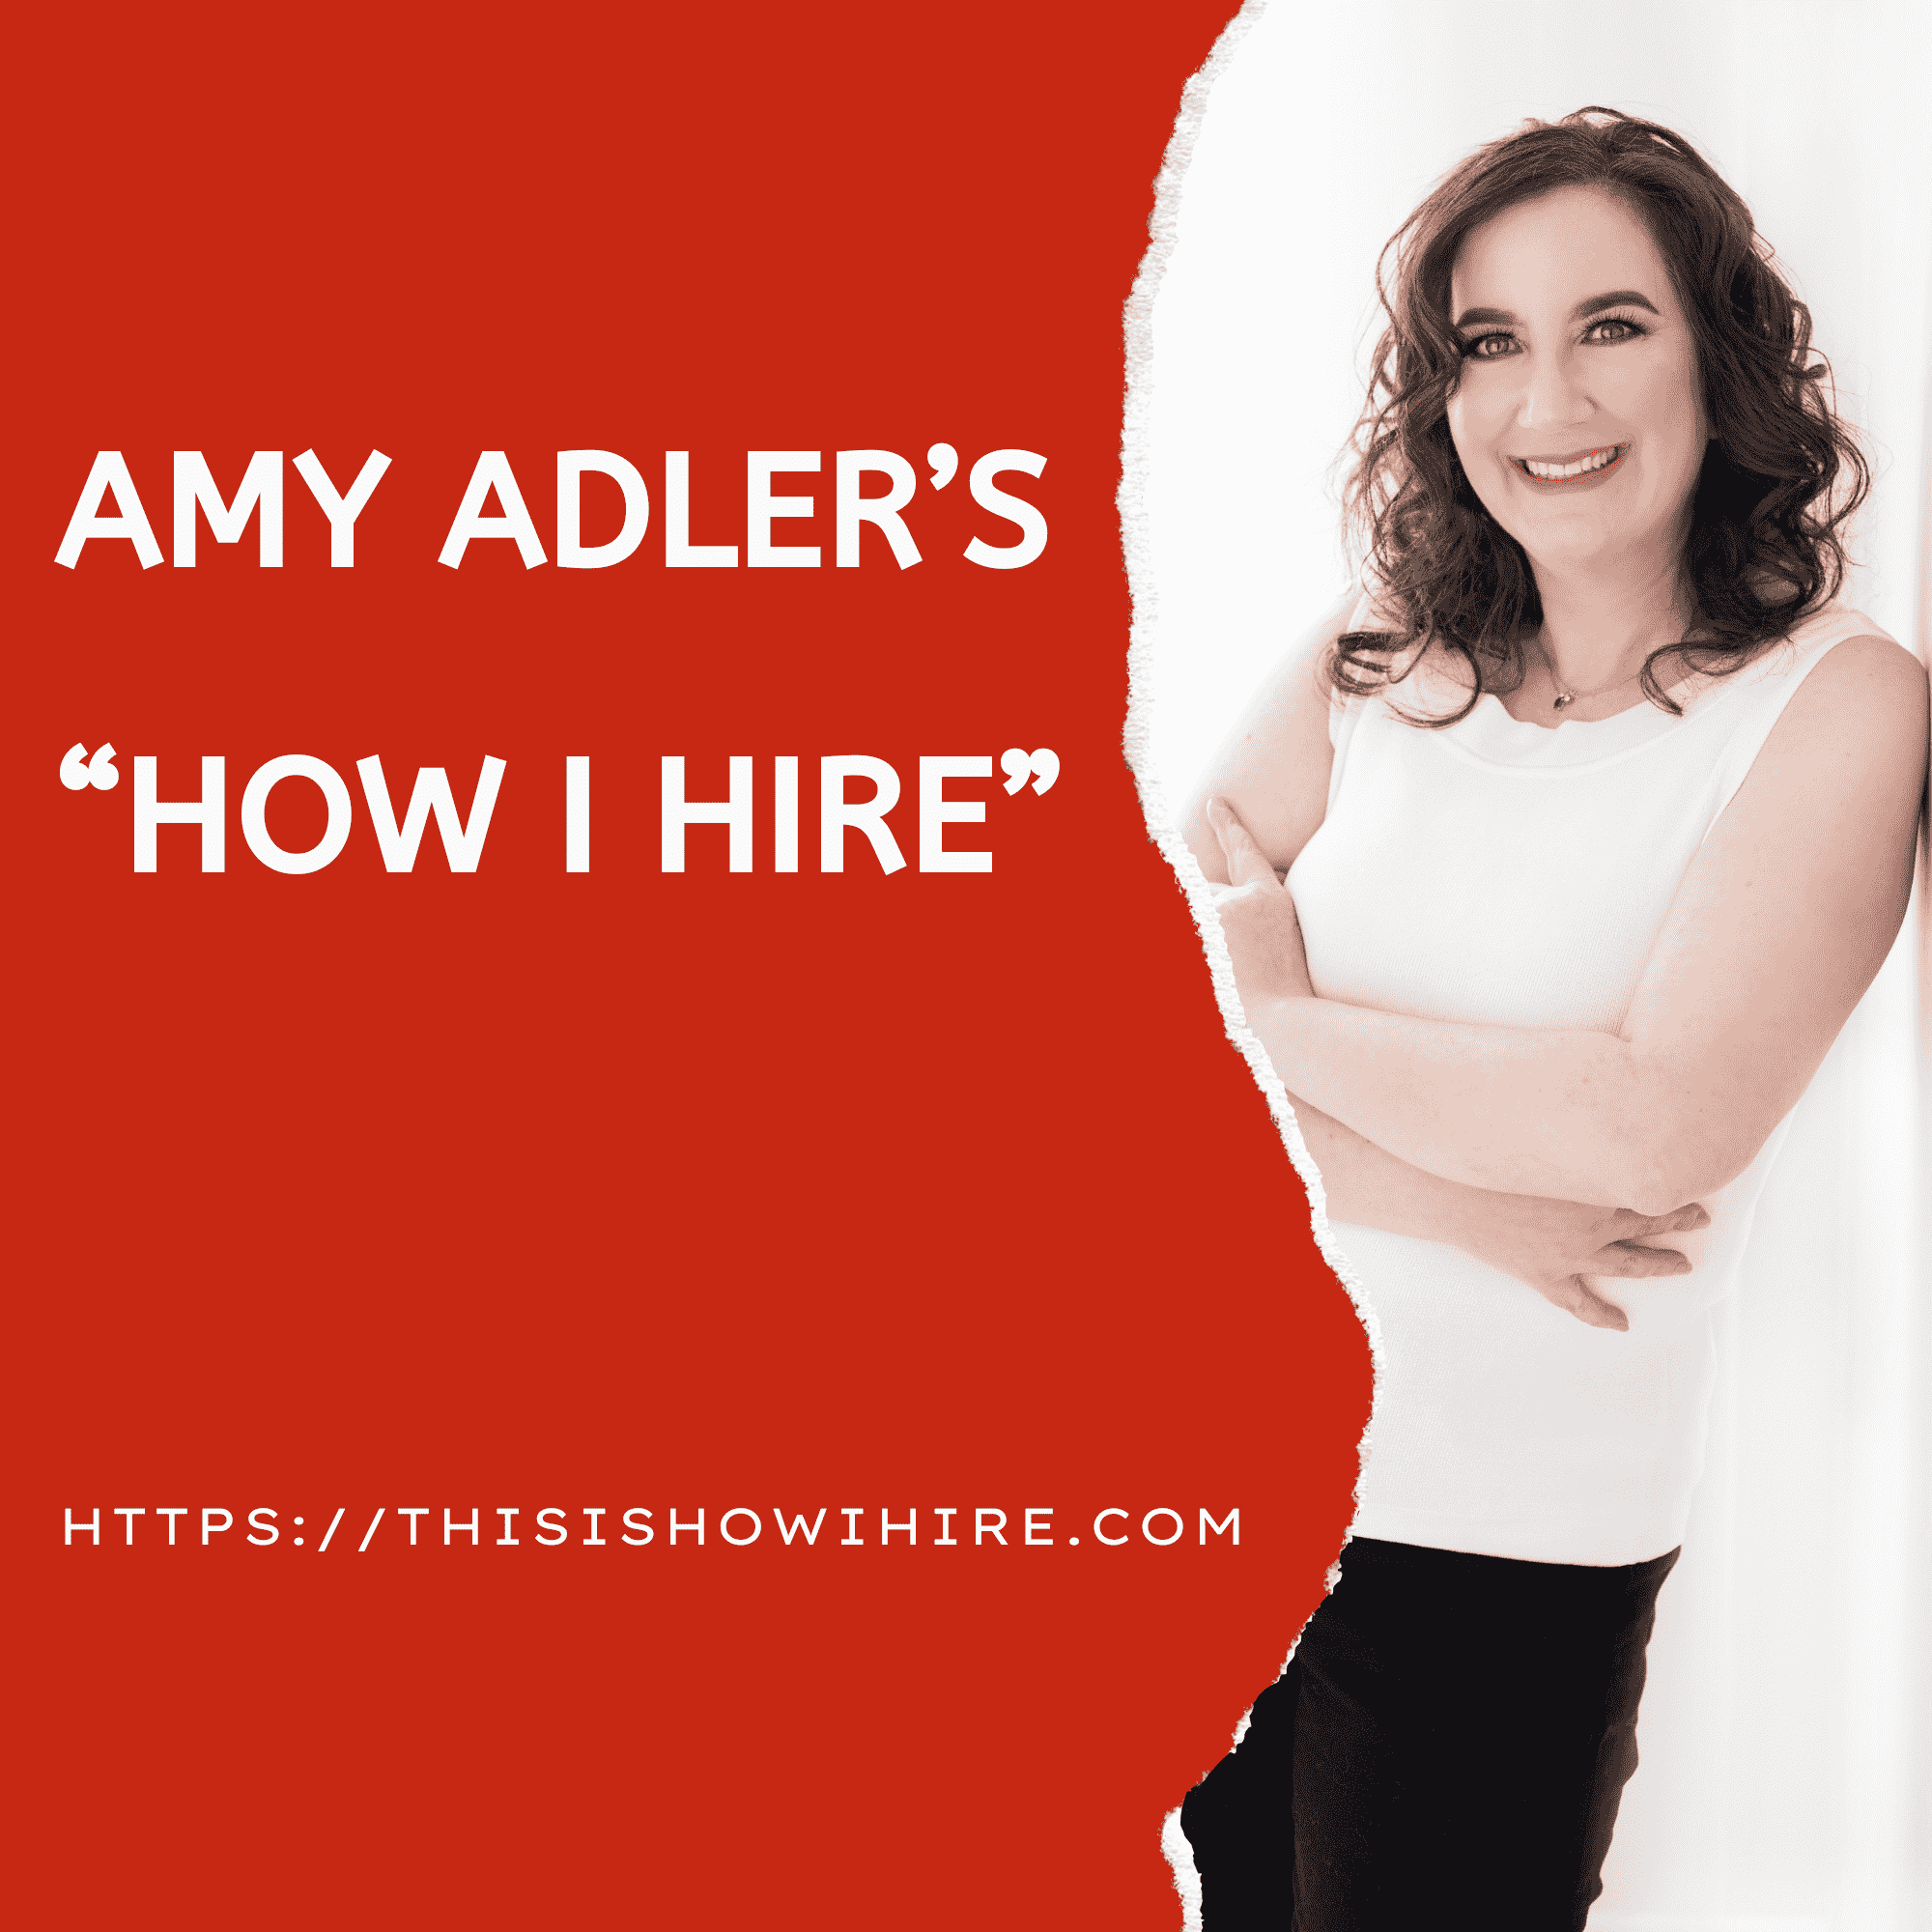 Tom Gardner: Own Your Hiring (and Firing) Decisions | Amy Adler's "How I Hire"